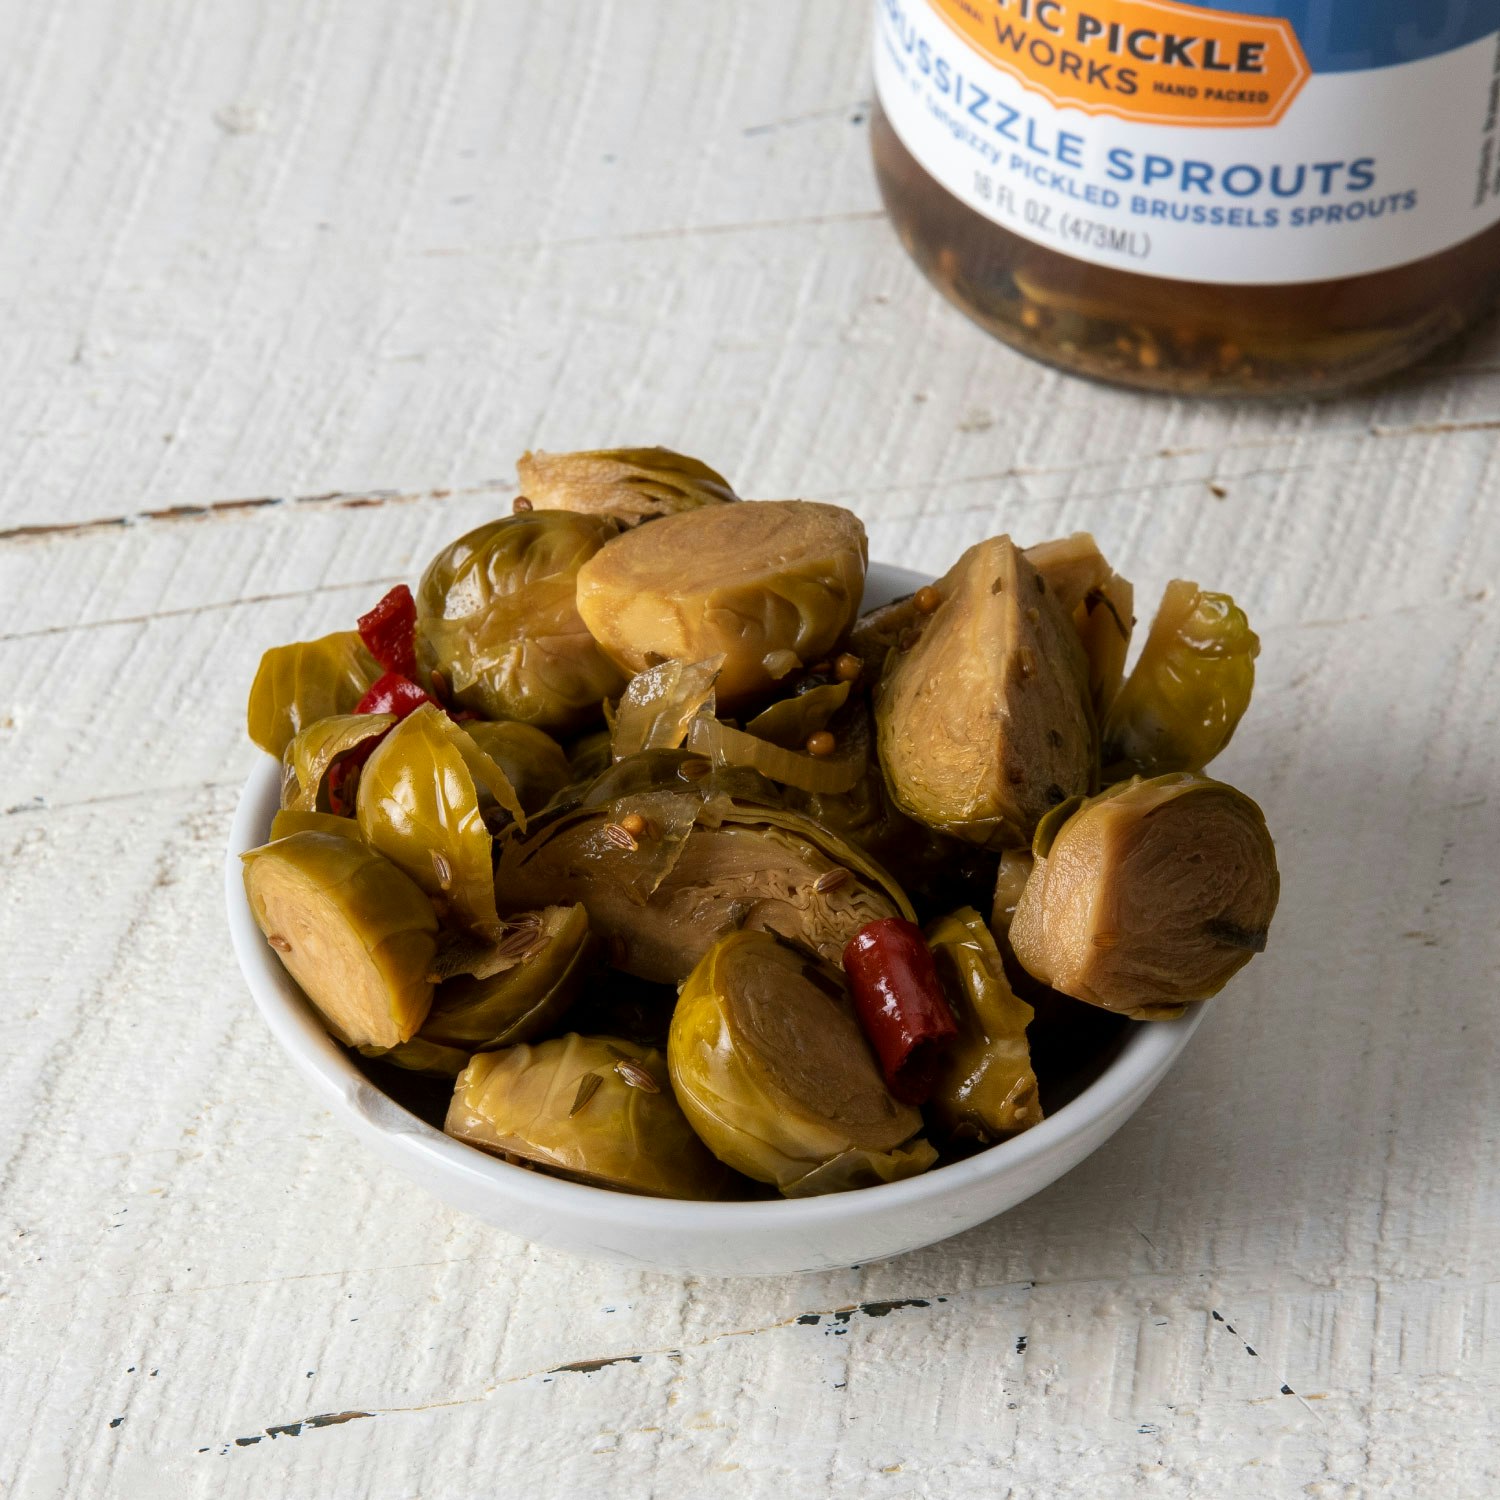 pacific pickle works brussizzle sprouts specialty foods